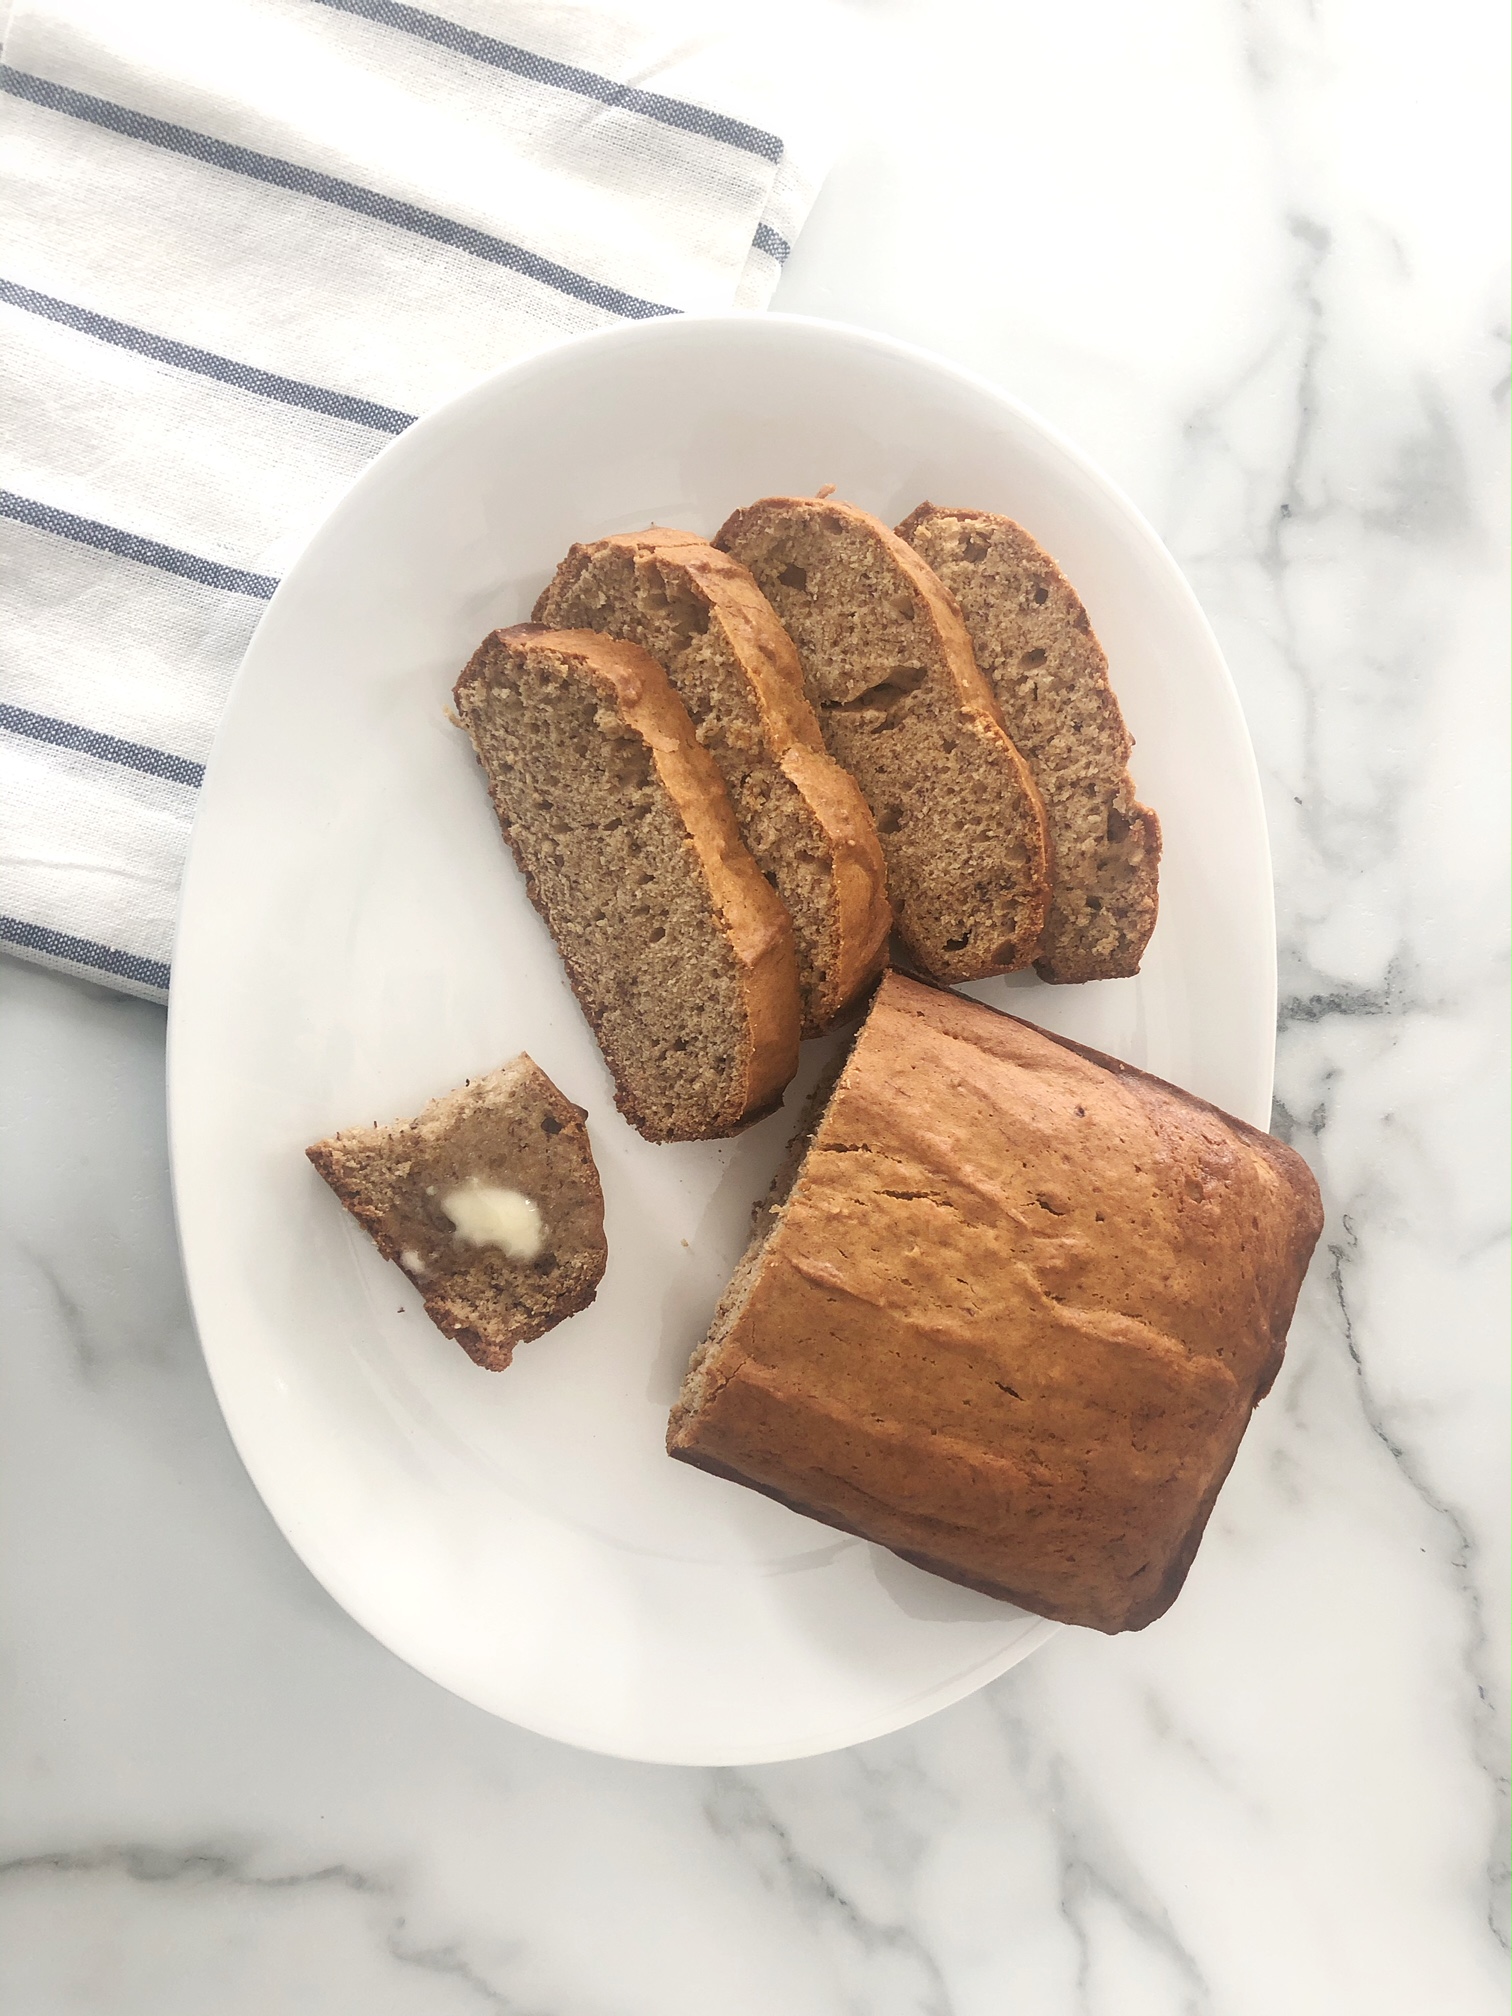 The Best Healthy Banana Bread Recipe From the 90’s